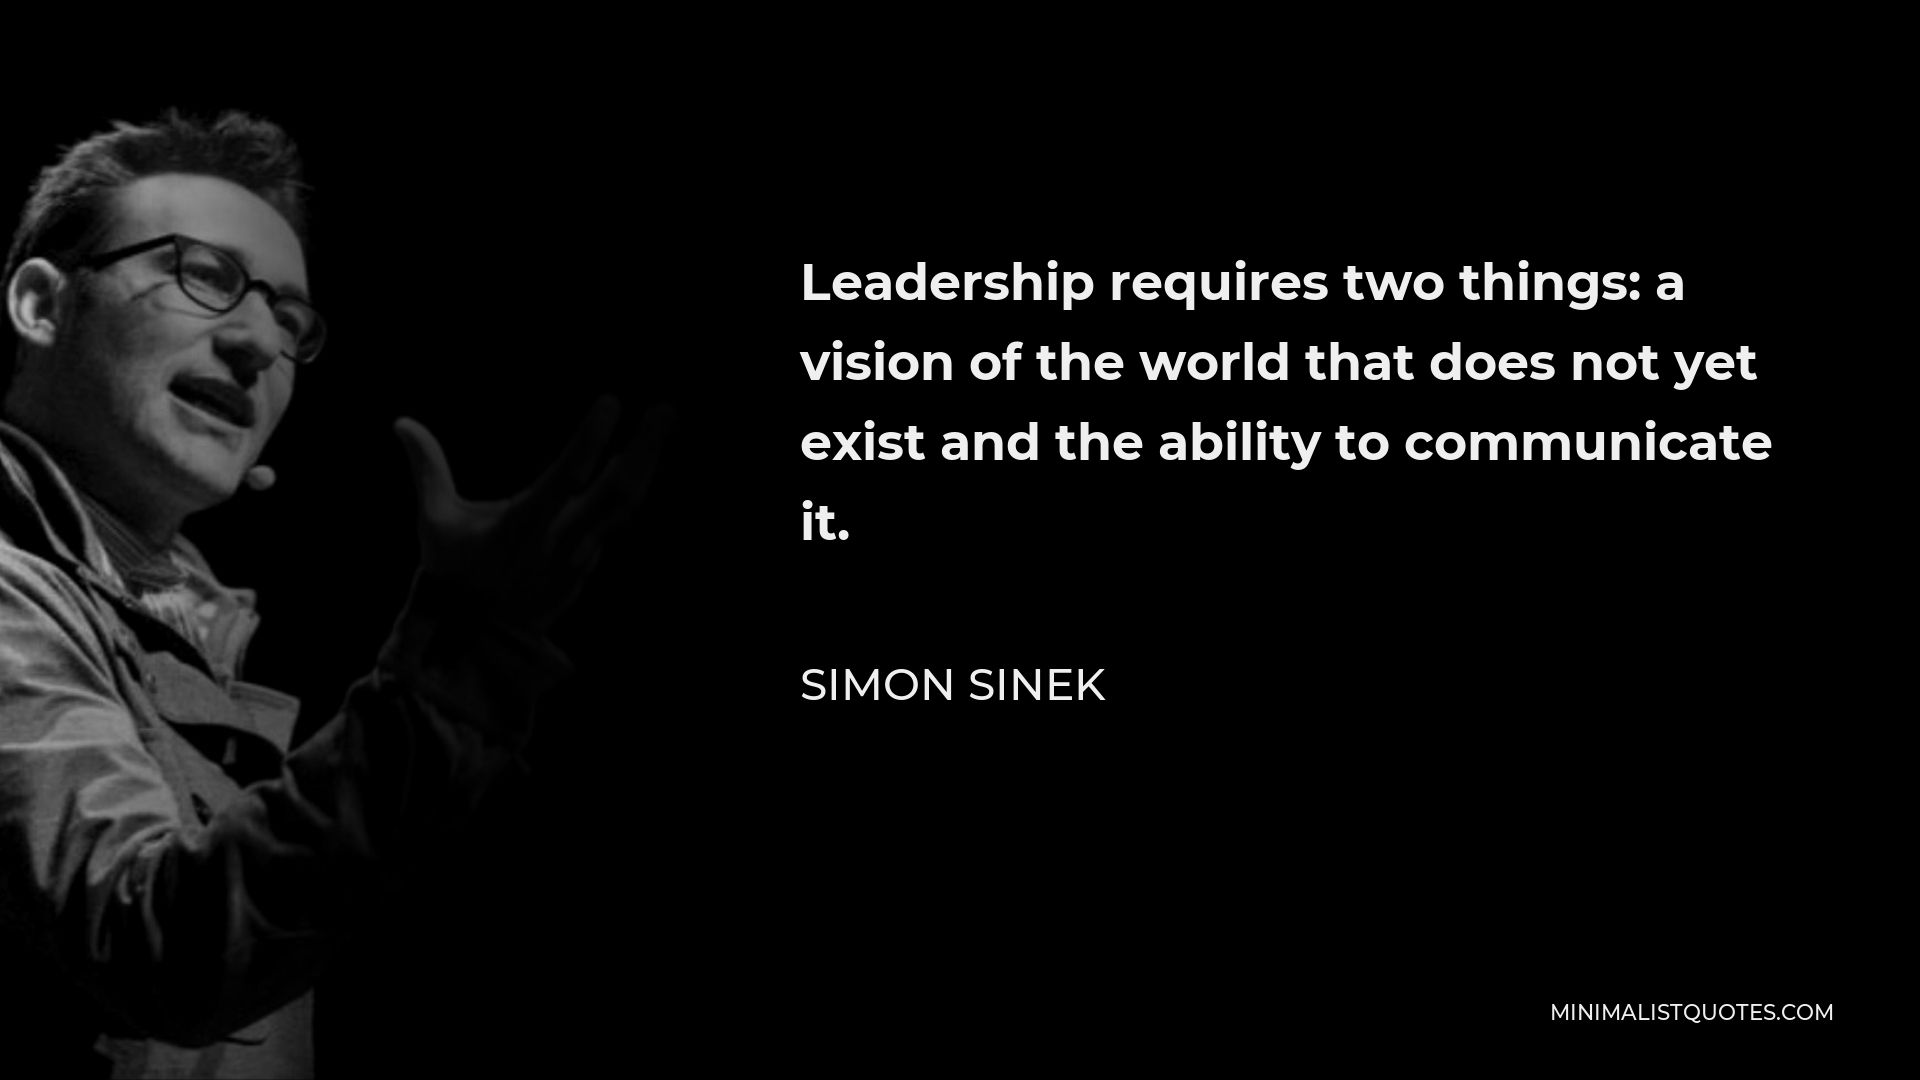 Simon Sinek Quote - Leadership requires two things: a vision of the world that does not yet exist and the ability to communicate it.